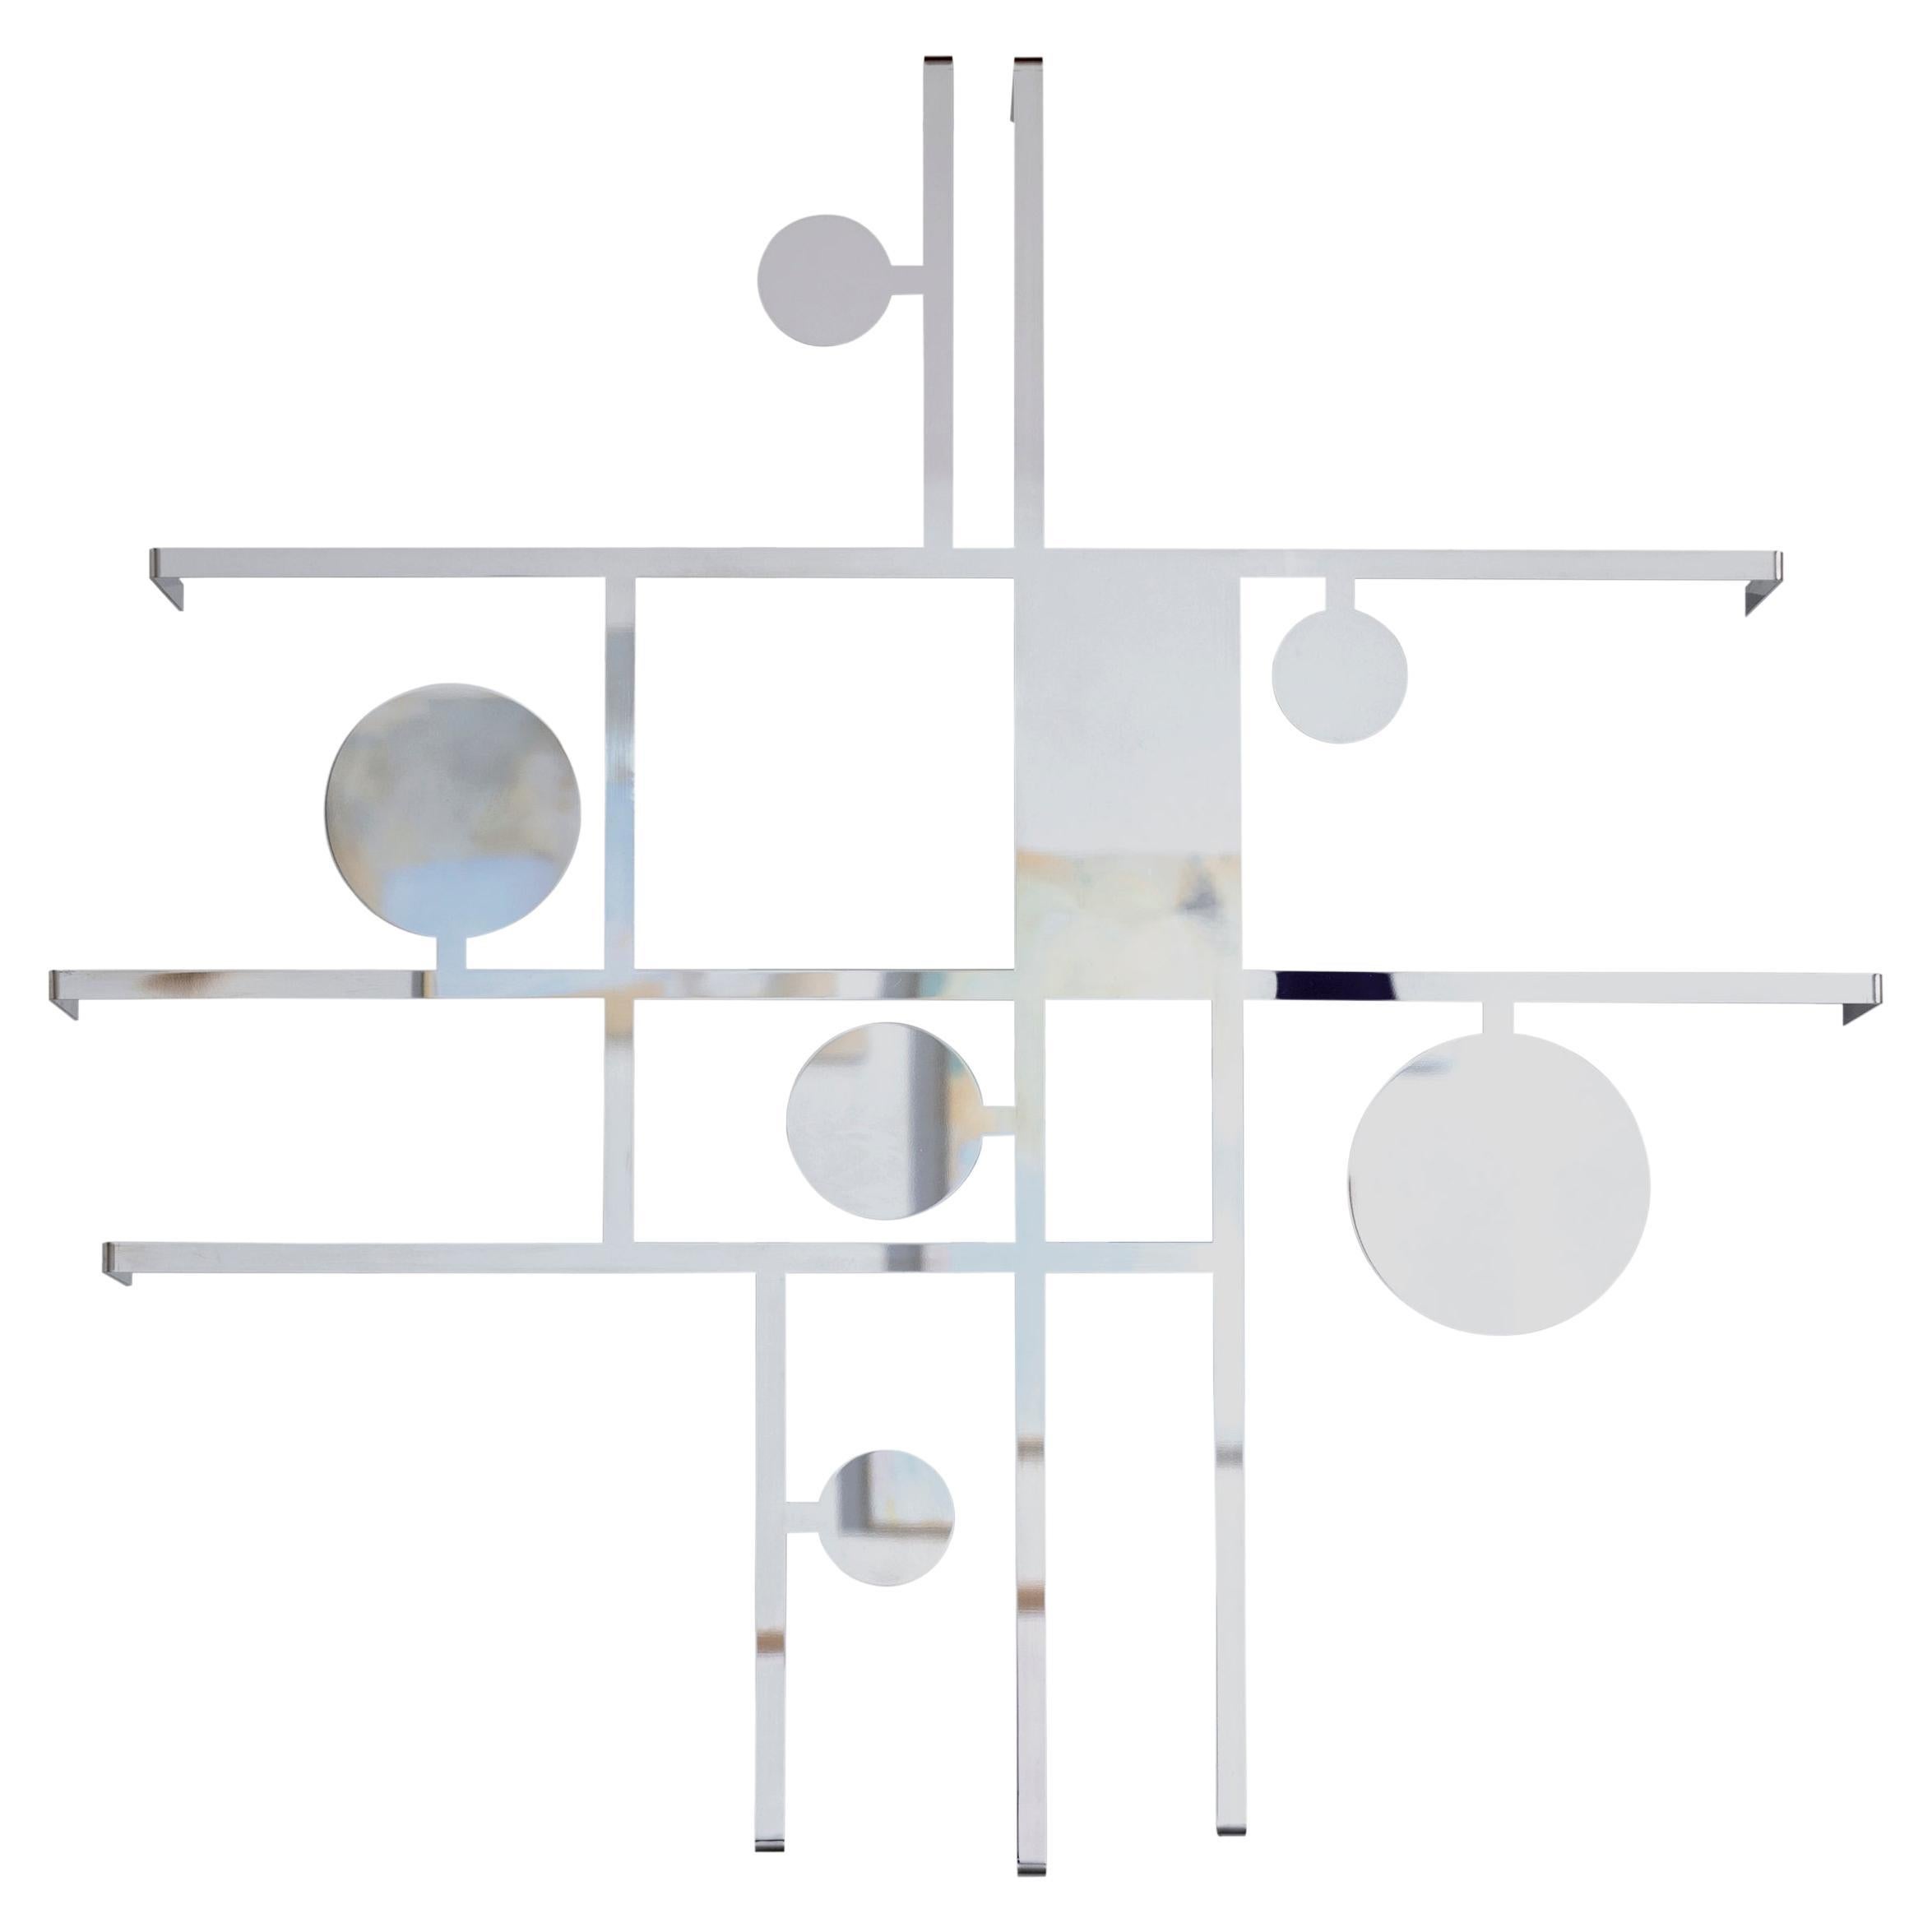 Axolight Manifesto Small Ceiling Light in Mirrored Steel Metal by Timo Ripatti For Sale